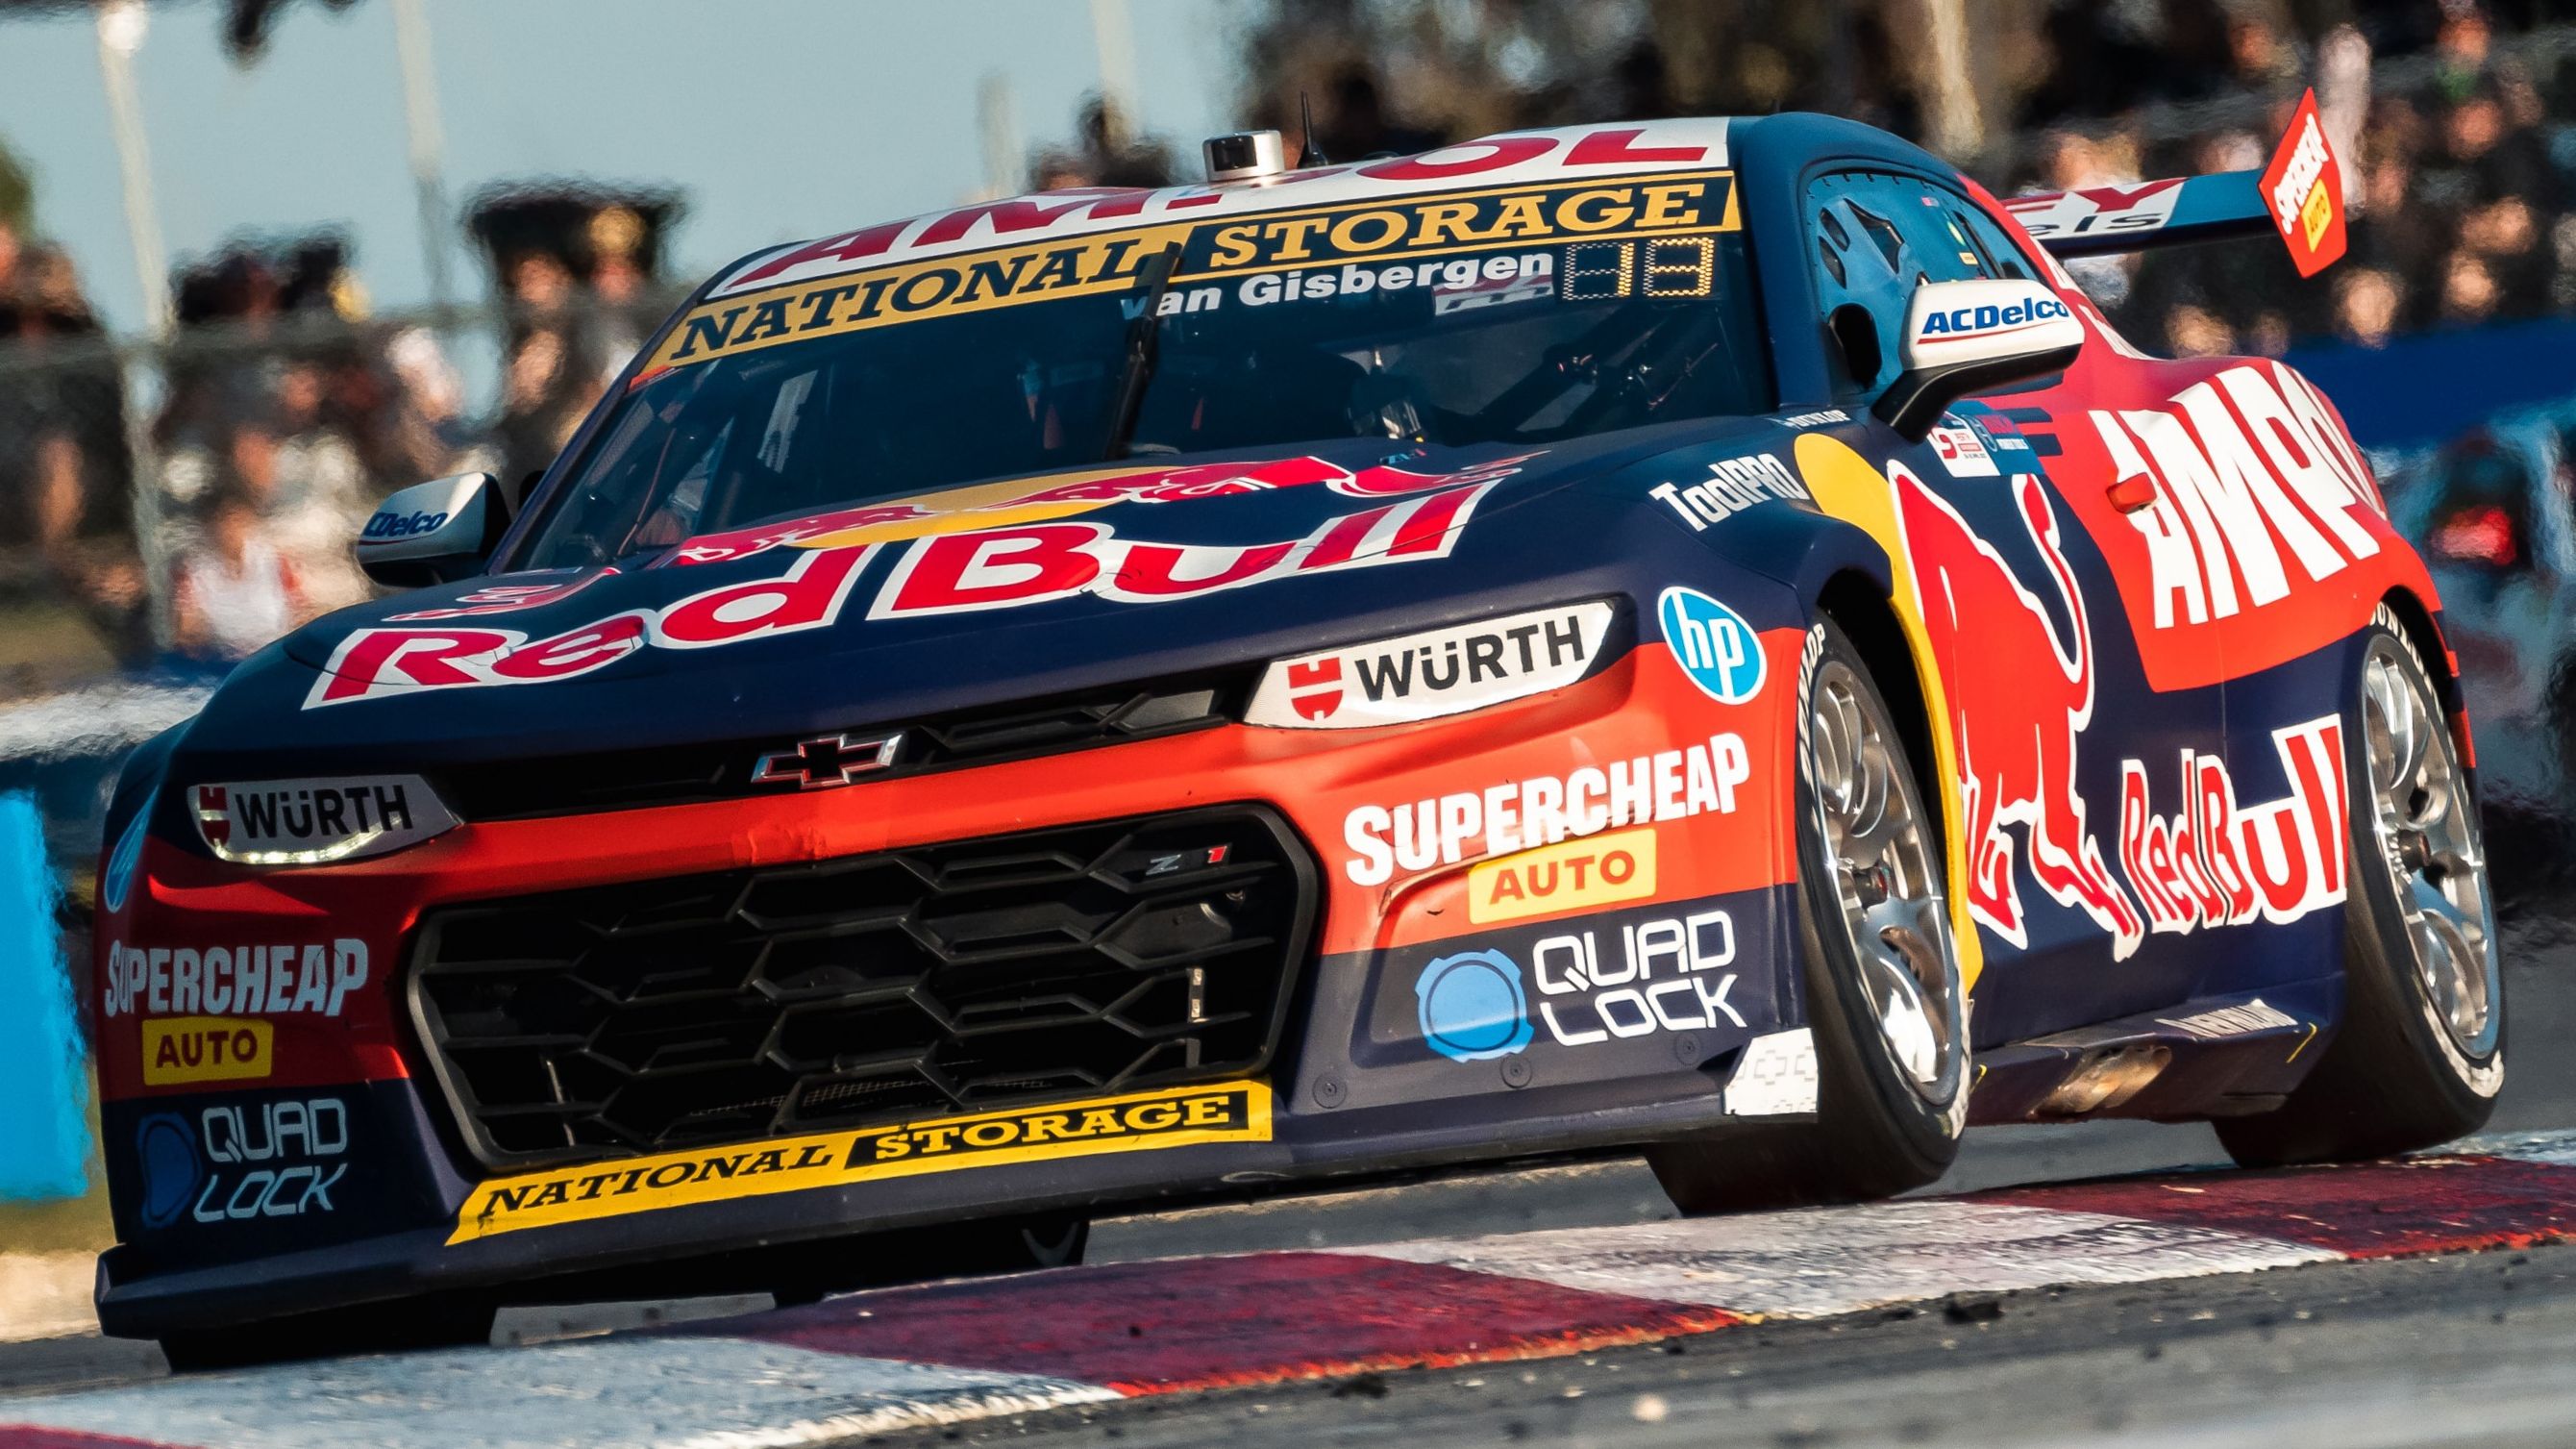 Shane van Gisbergen sits fourth in the Supercars standings after five events.